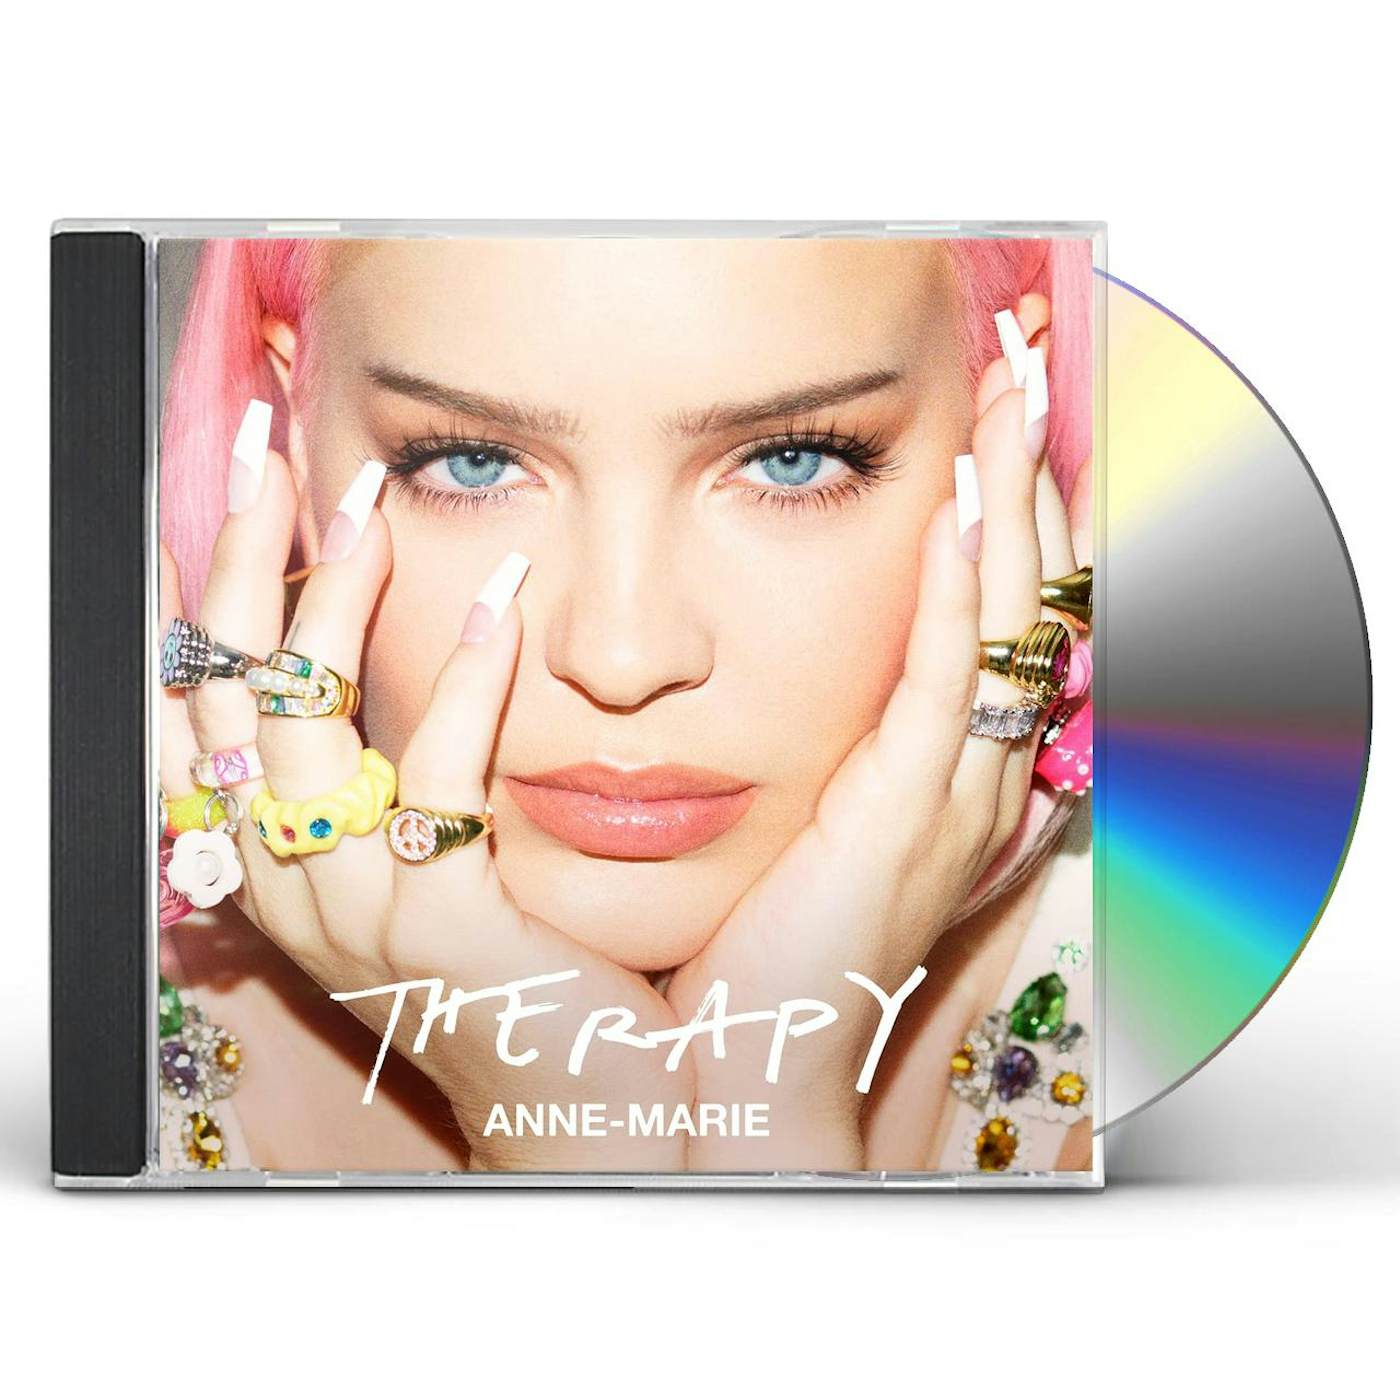 Anne-Marie THERAPY CD